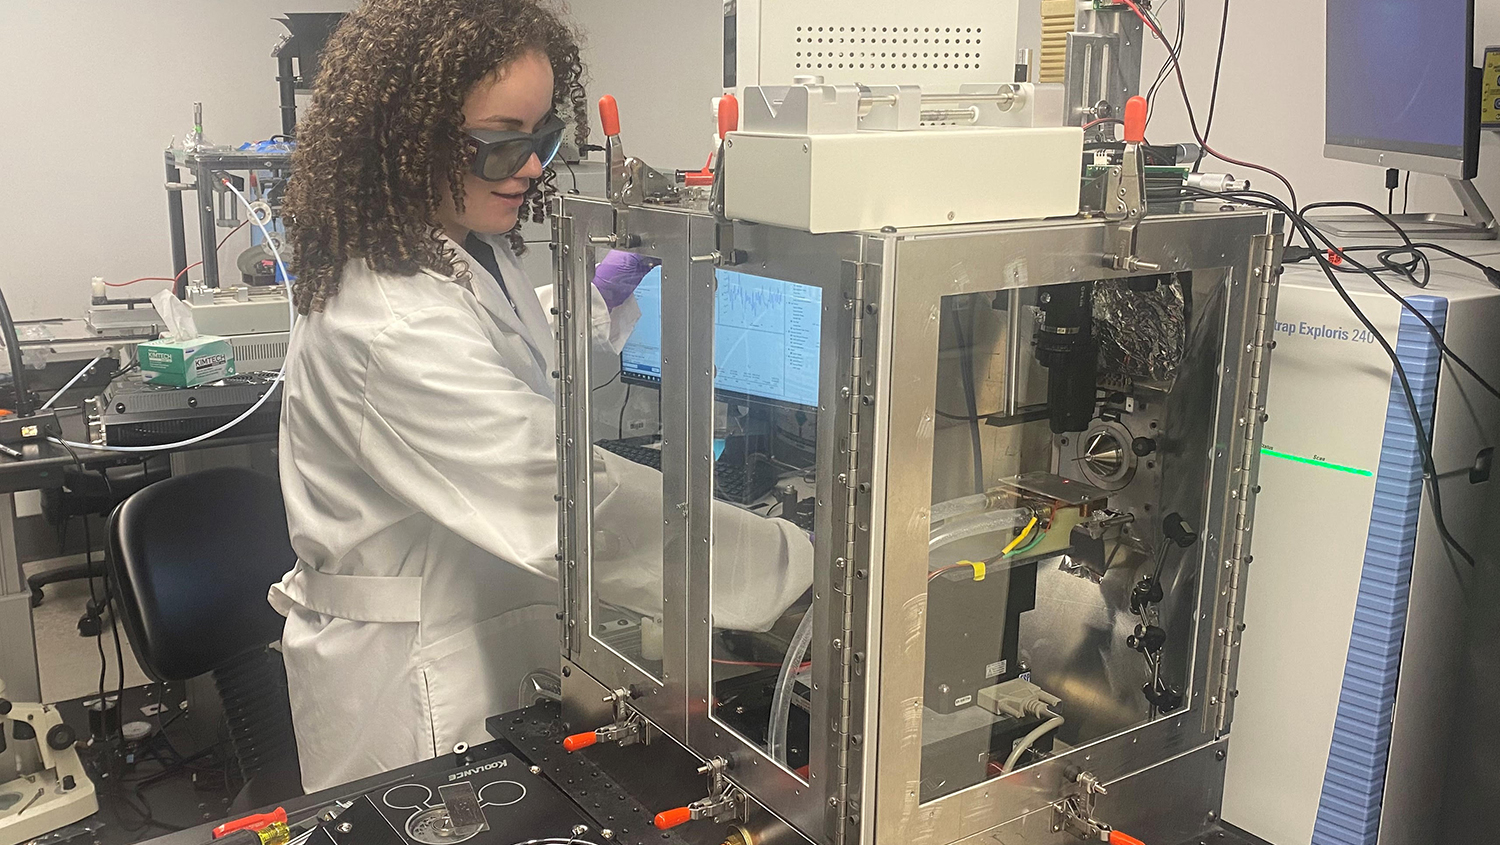 Olivia Dioli, an undergraduate researcher in the Muddiman group, is shown here carrying out experiments involving the development of a system suitability strategy for mass spectrometry imaging.